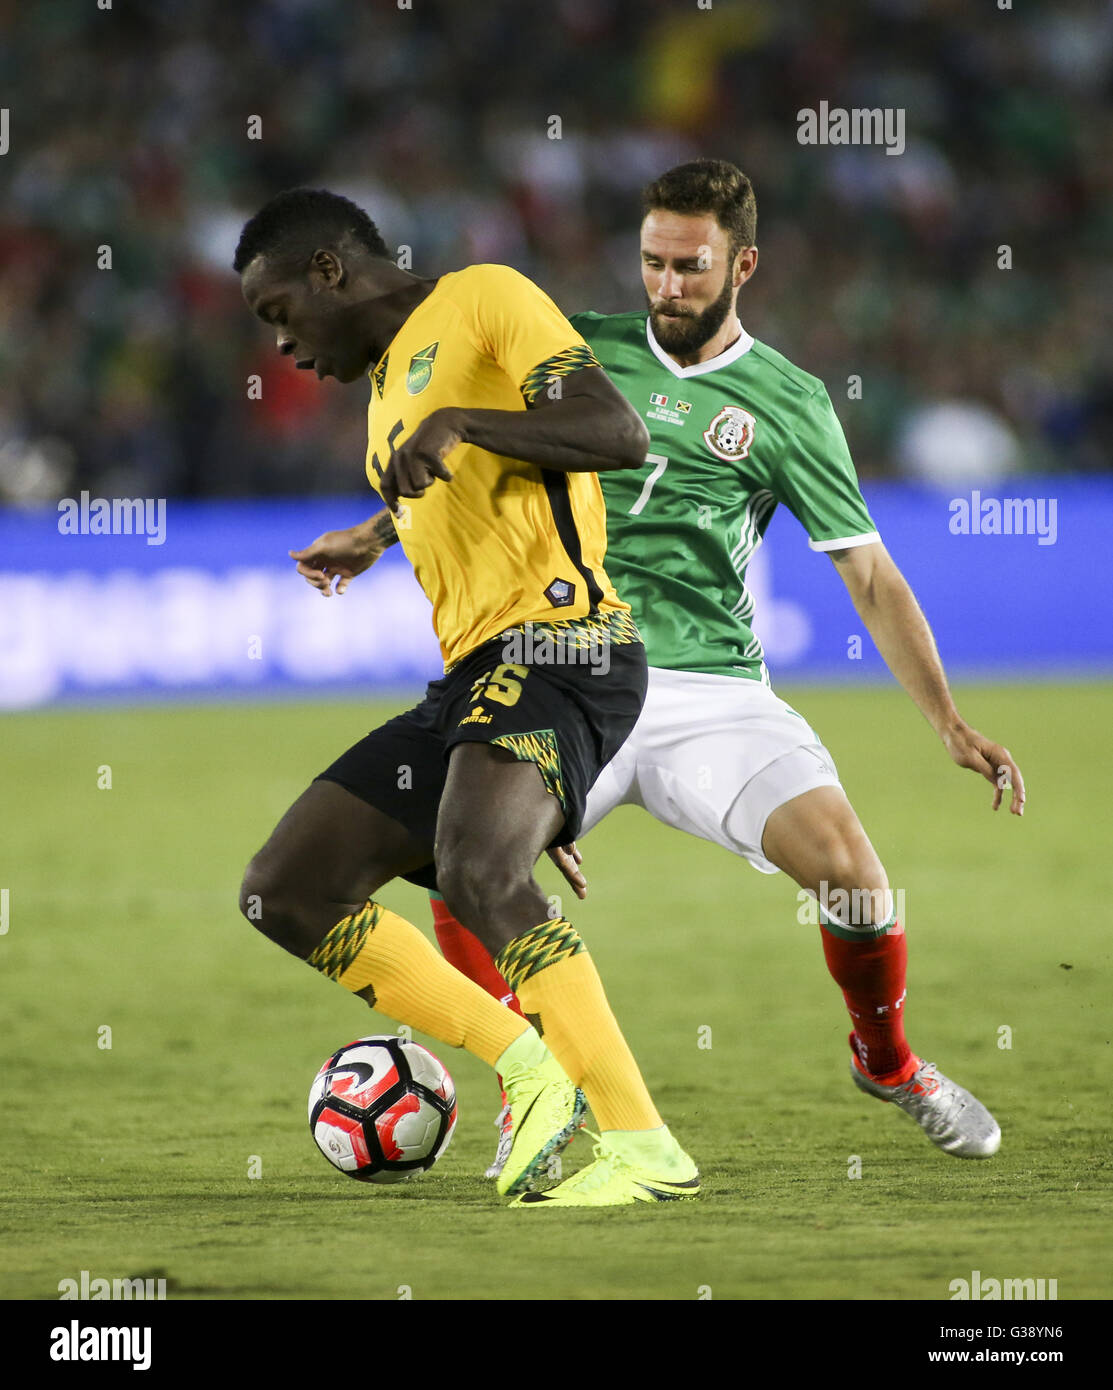 Los Angeles, California, USA. 9th June, 2016. Mexico defender Miguel Layun #7 and Jamaica midfielder Je-Vanghn Watson #15 in a Copa America soccer match between Mexico and ÃŠJamaica of Group C at the Rose Bowl in Pasadena, California, June 9, 2016. Mexico won 2-0. Credit:  Ringo Chiu/ZUMA Wire/Alamy Live News Stock Photo